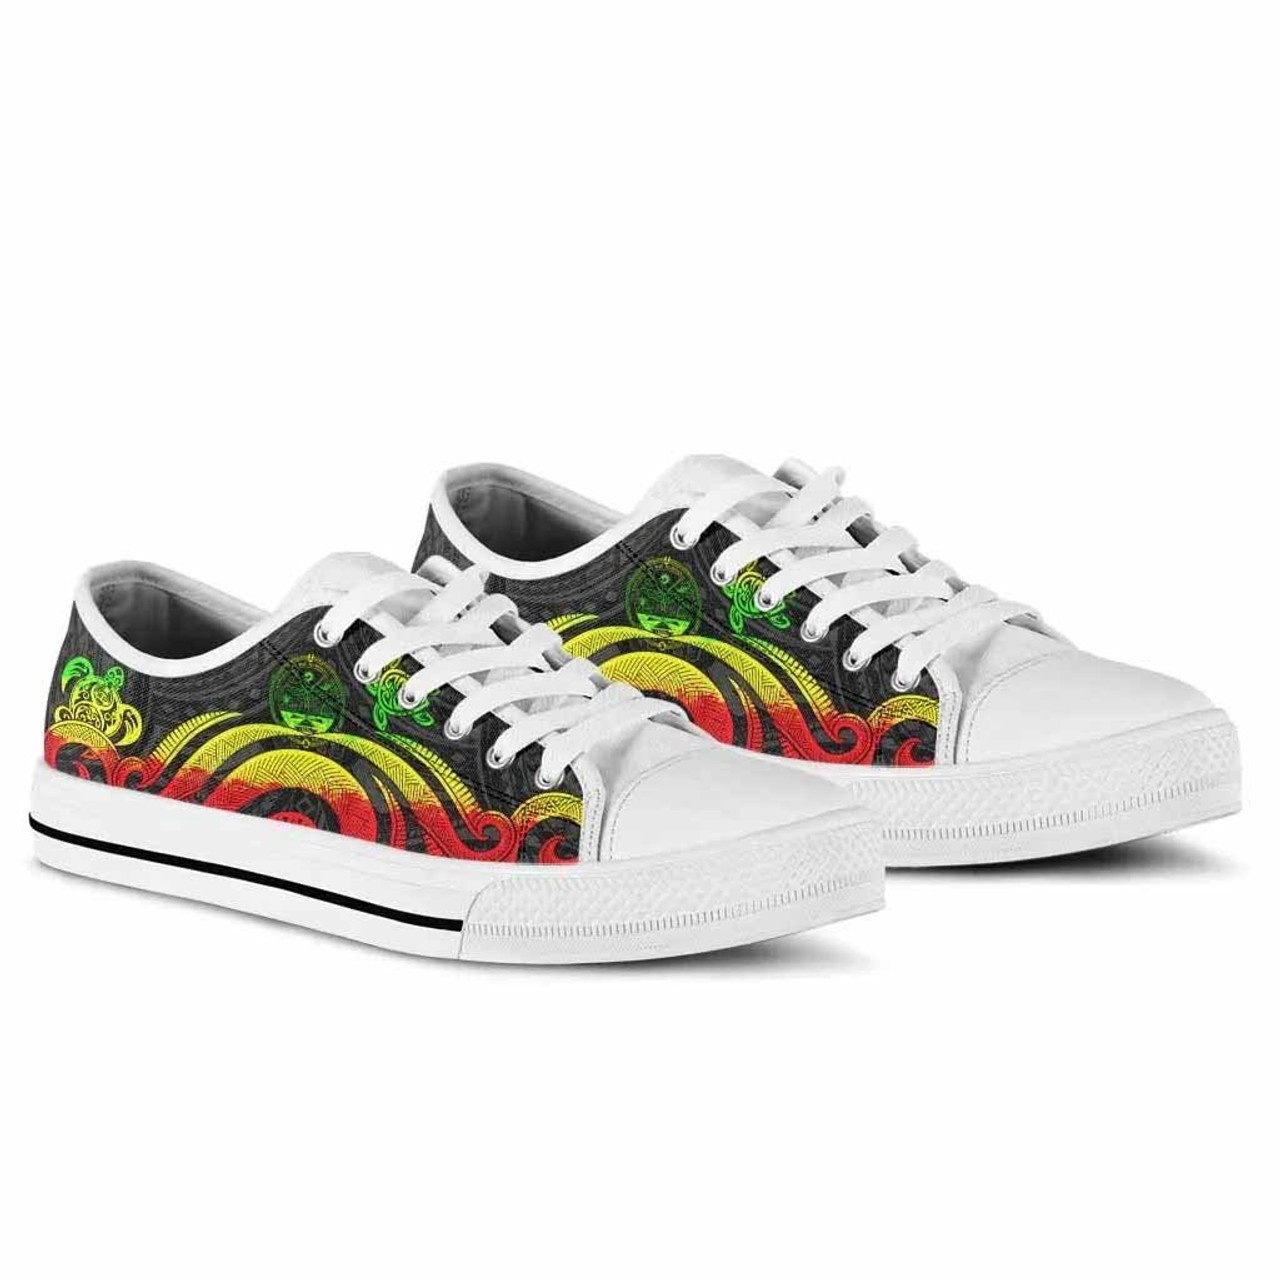 Marshall Islands Low Top Canvas Shoes - Reggae Tentacle Turtle Crest 7